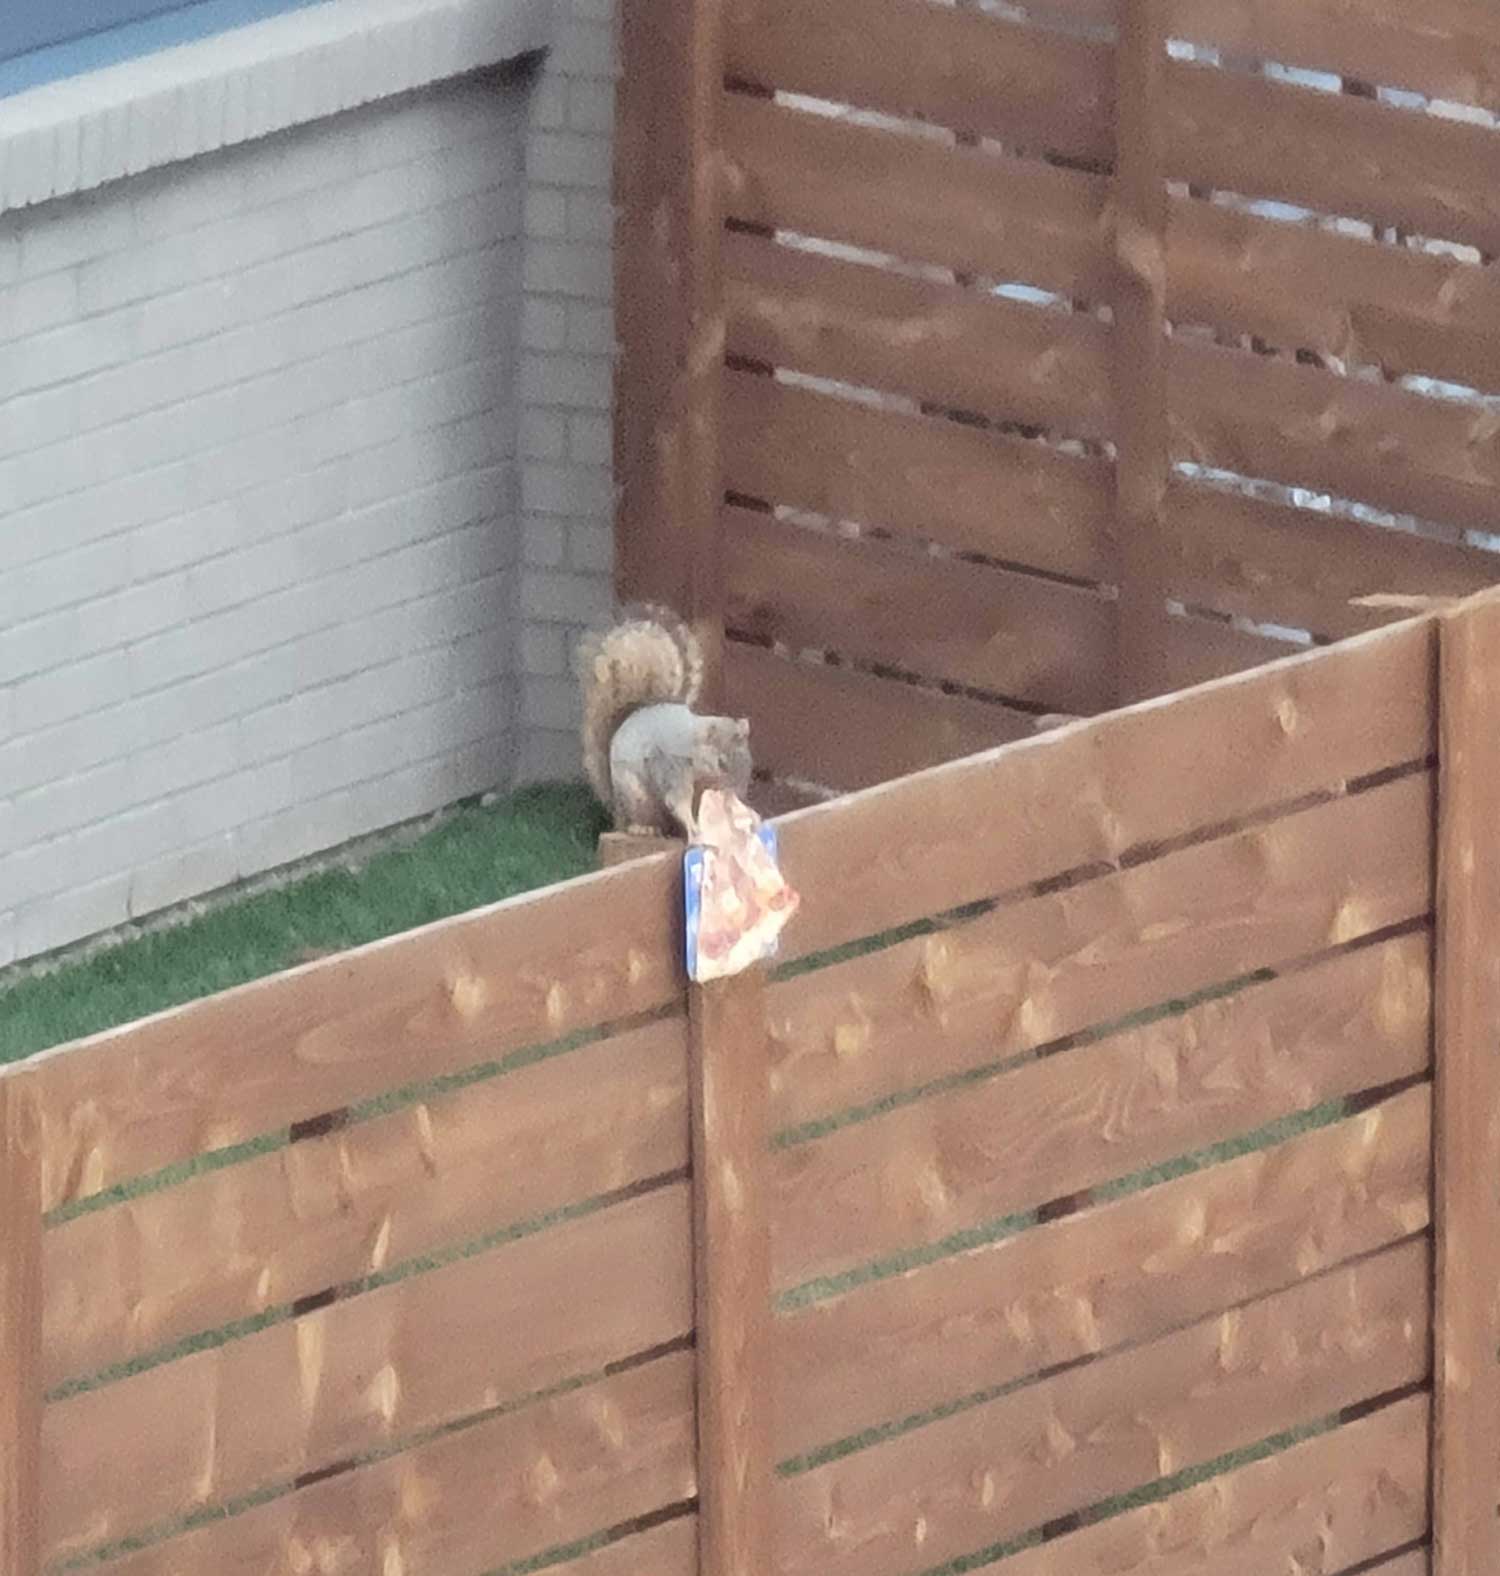 This squirrel was just chilling eating a slice of pizza on the fence